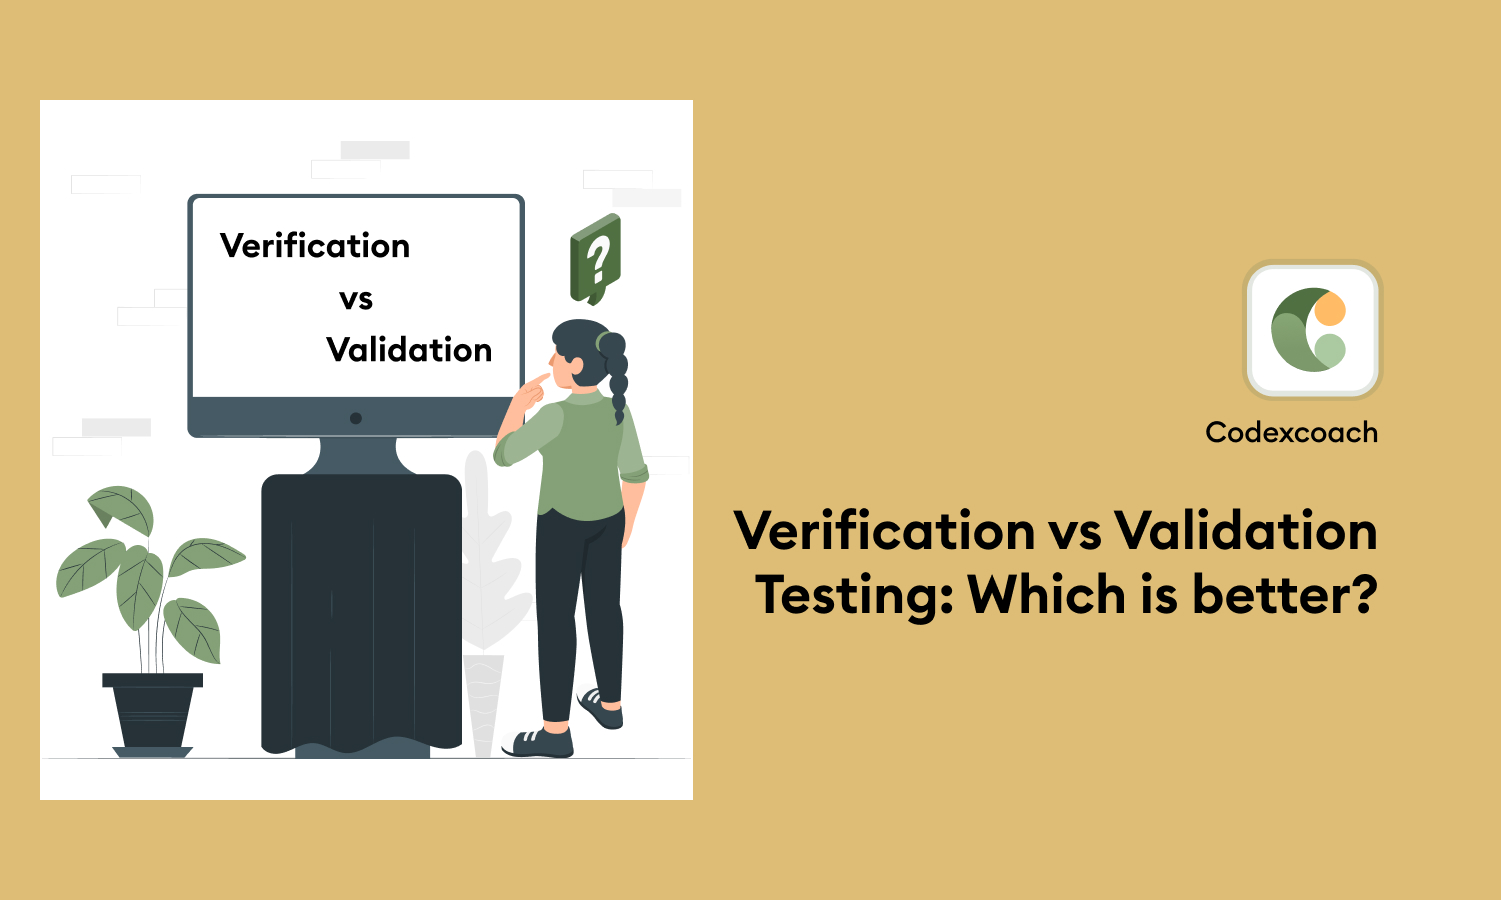 Verification vs Validation Testing: Which is better?